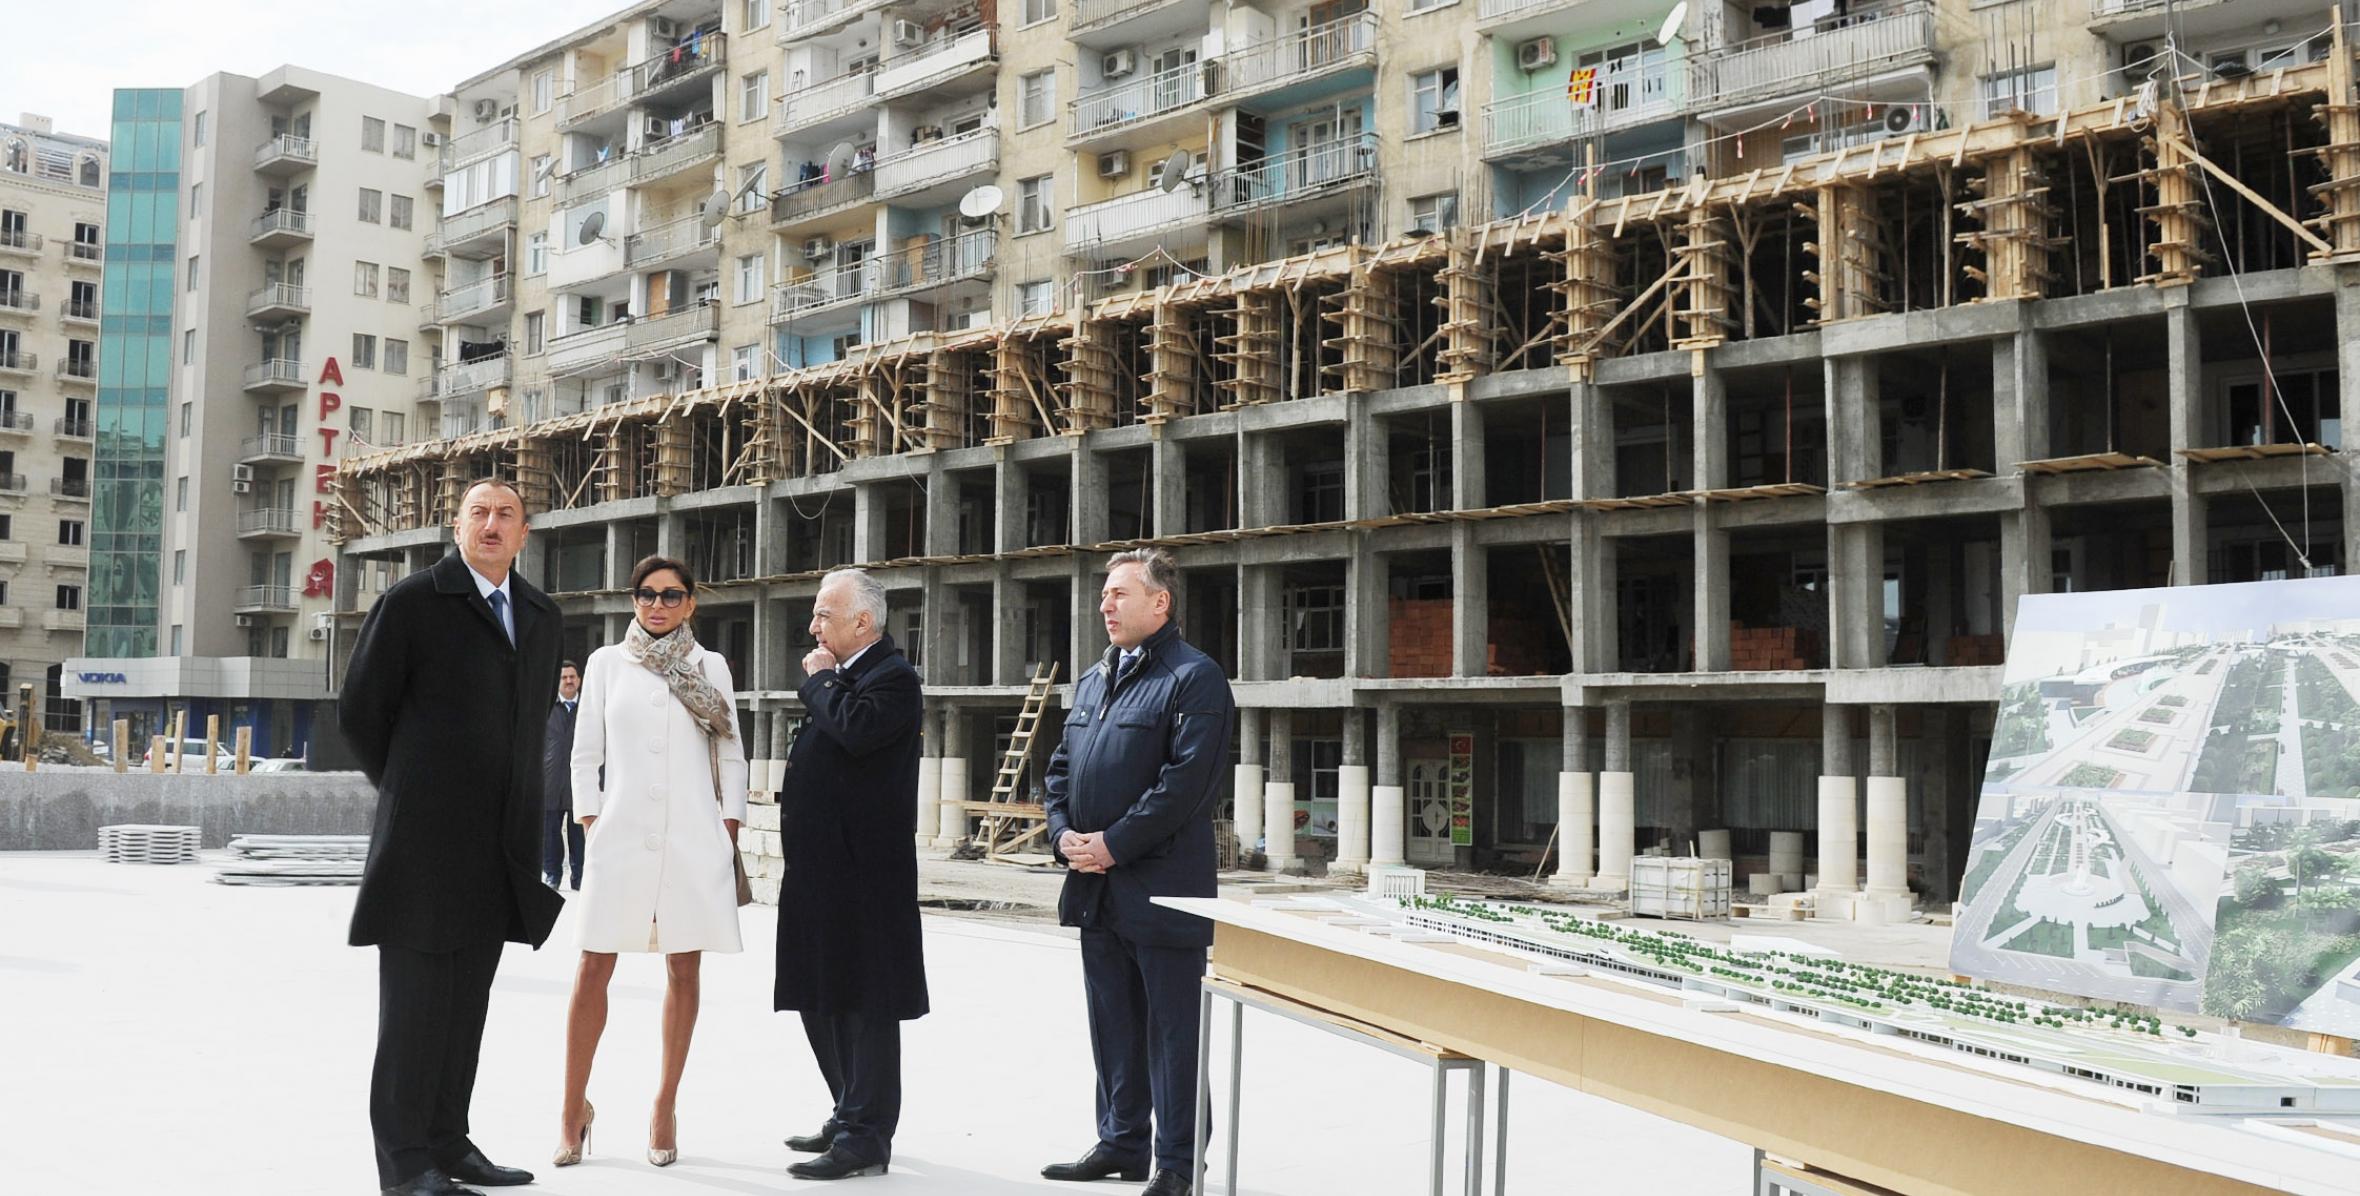 Ilham Aliyev reviewed progress of construction of underground parking, park, garden and a fountain complex on an area between Fizuli and Mirzaga Aliyev Streets of Baku